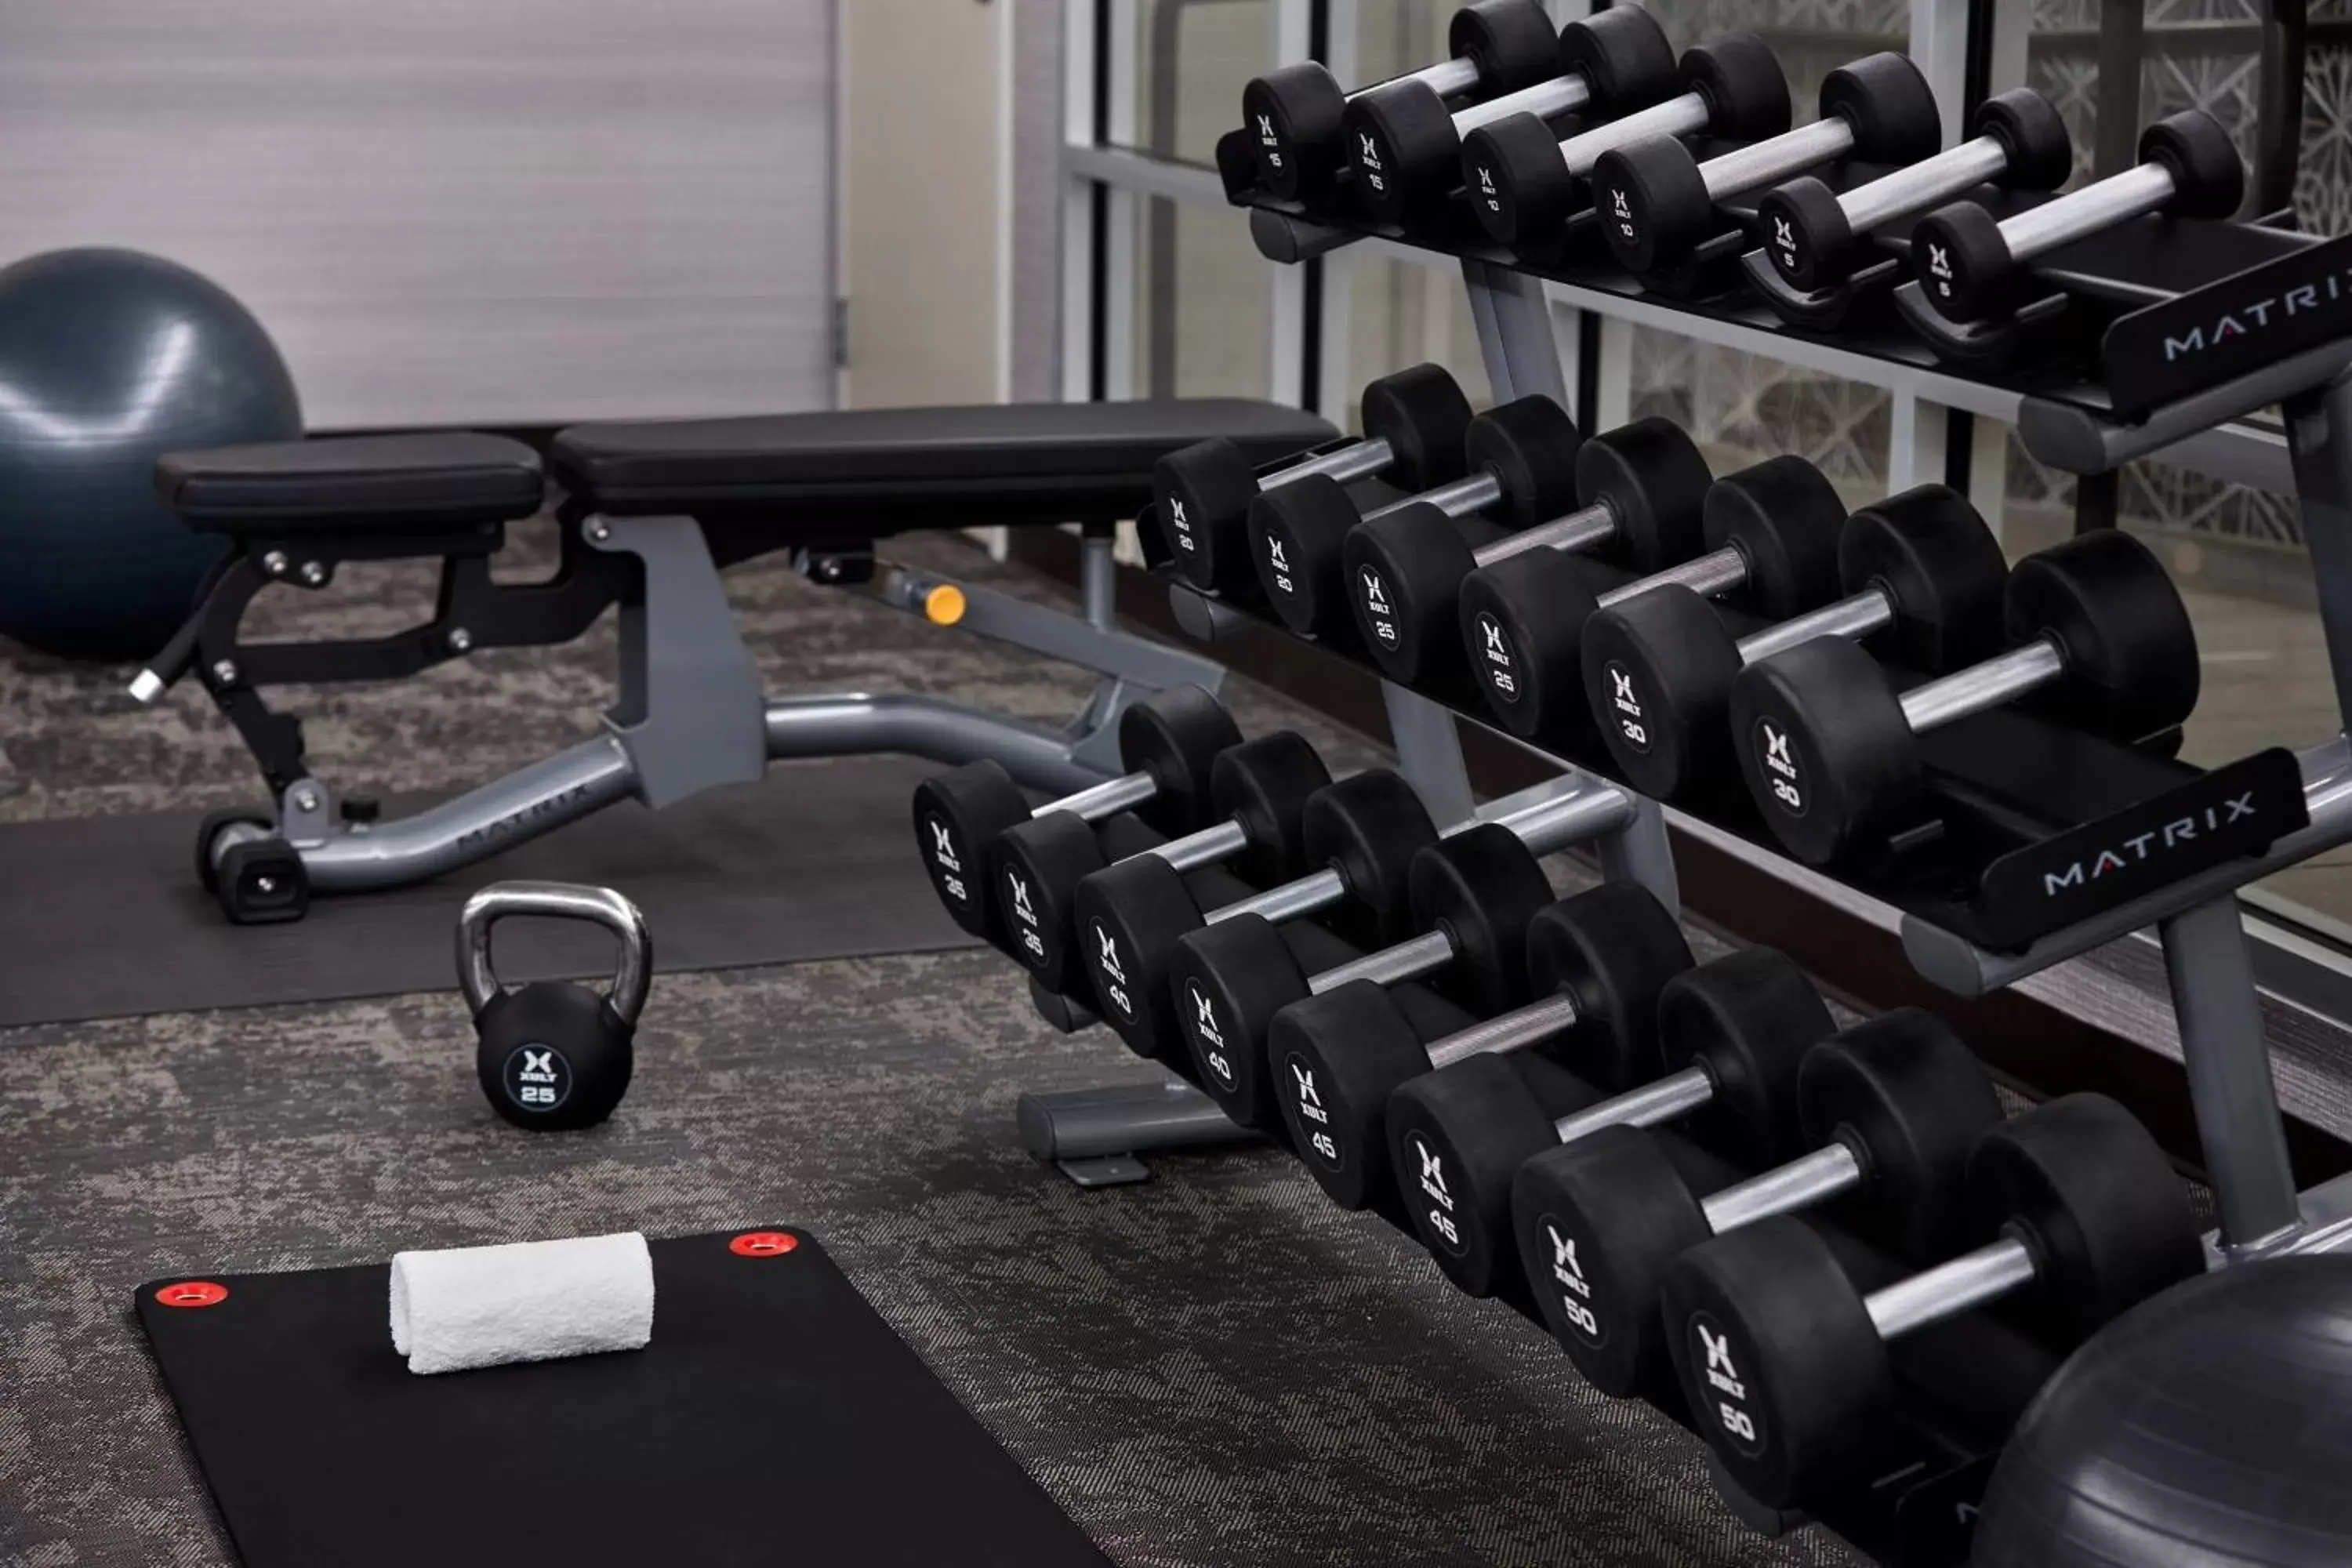 Fitness centre/facilities, Fitness Center/Facilities in Fairfield Inn & Suites by Marriott Washington Downtown